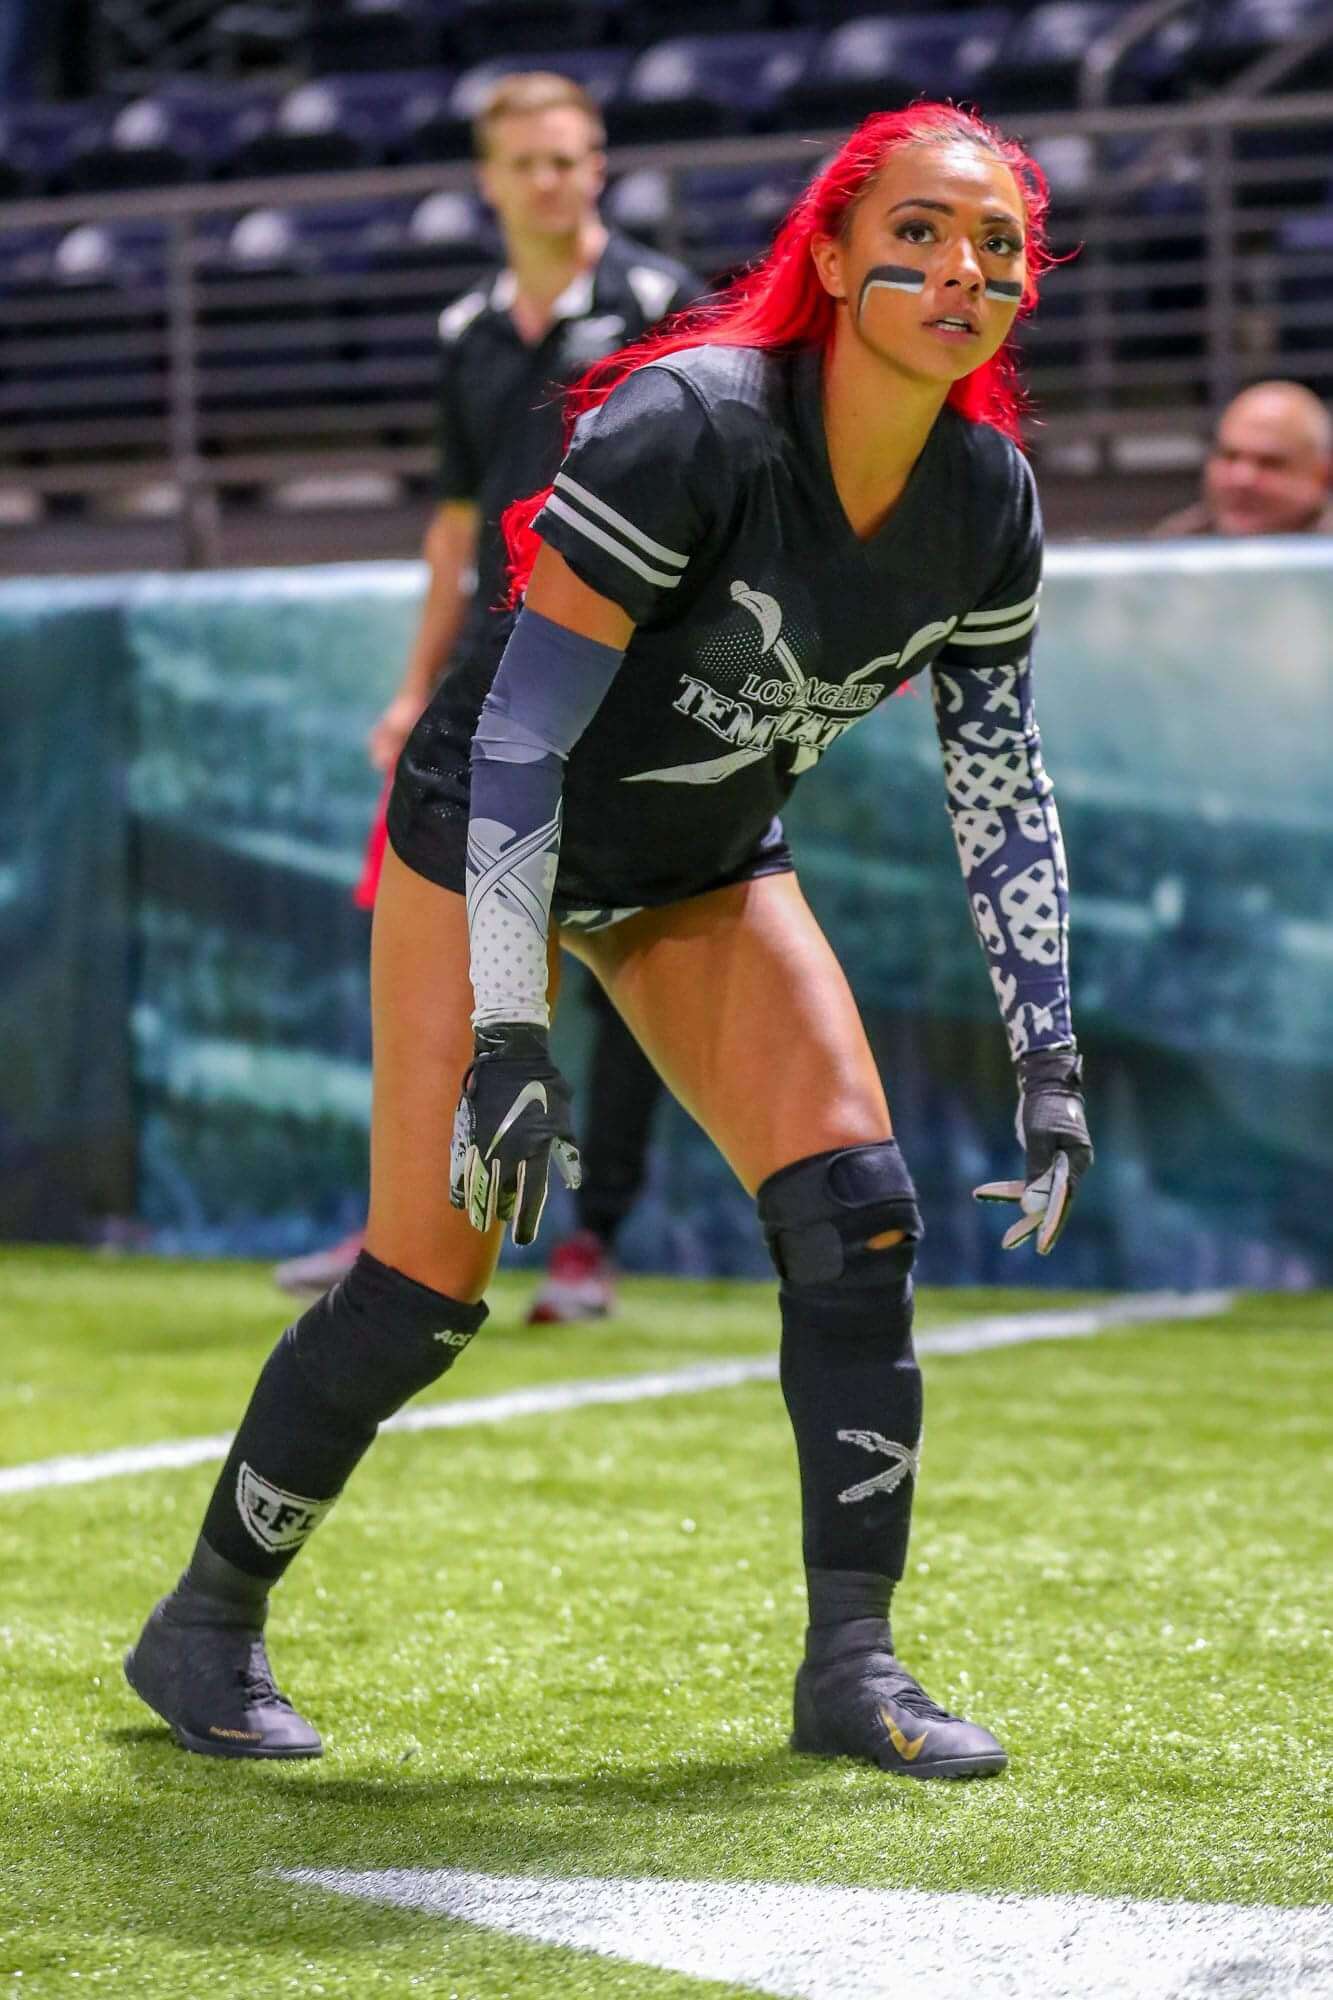 The Legends Football League Beautiful Women And Football, Need We Say Anymore! 24